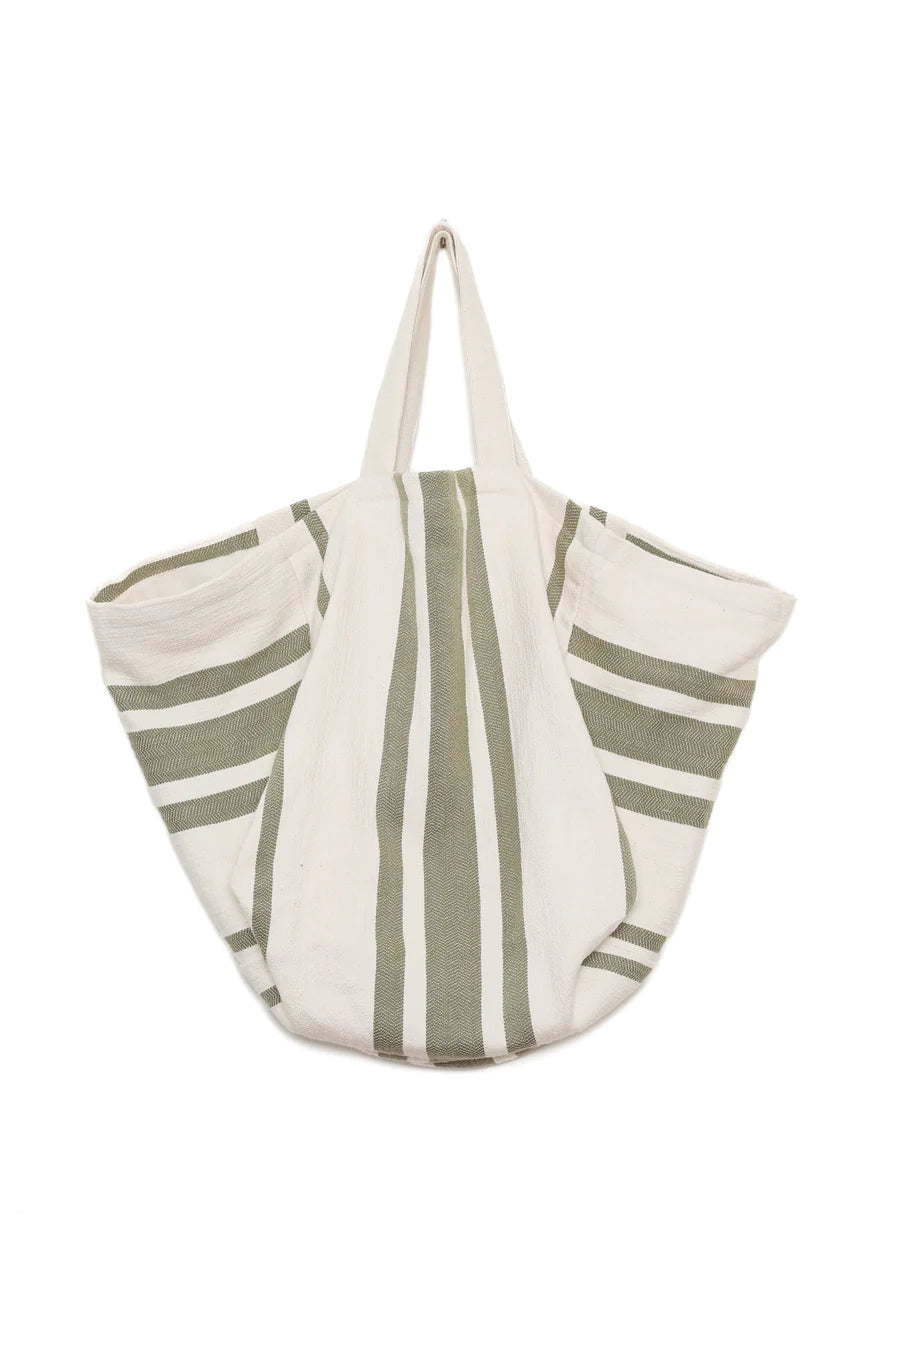 Tofino Towel Co. The Rey Oversized Tote Bag